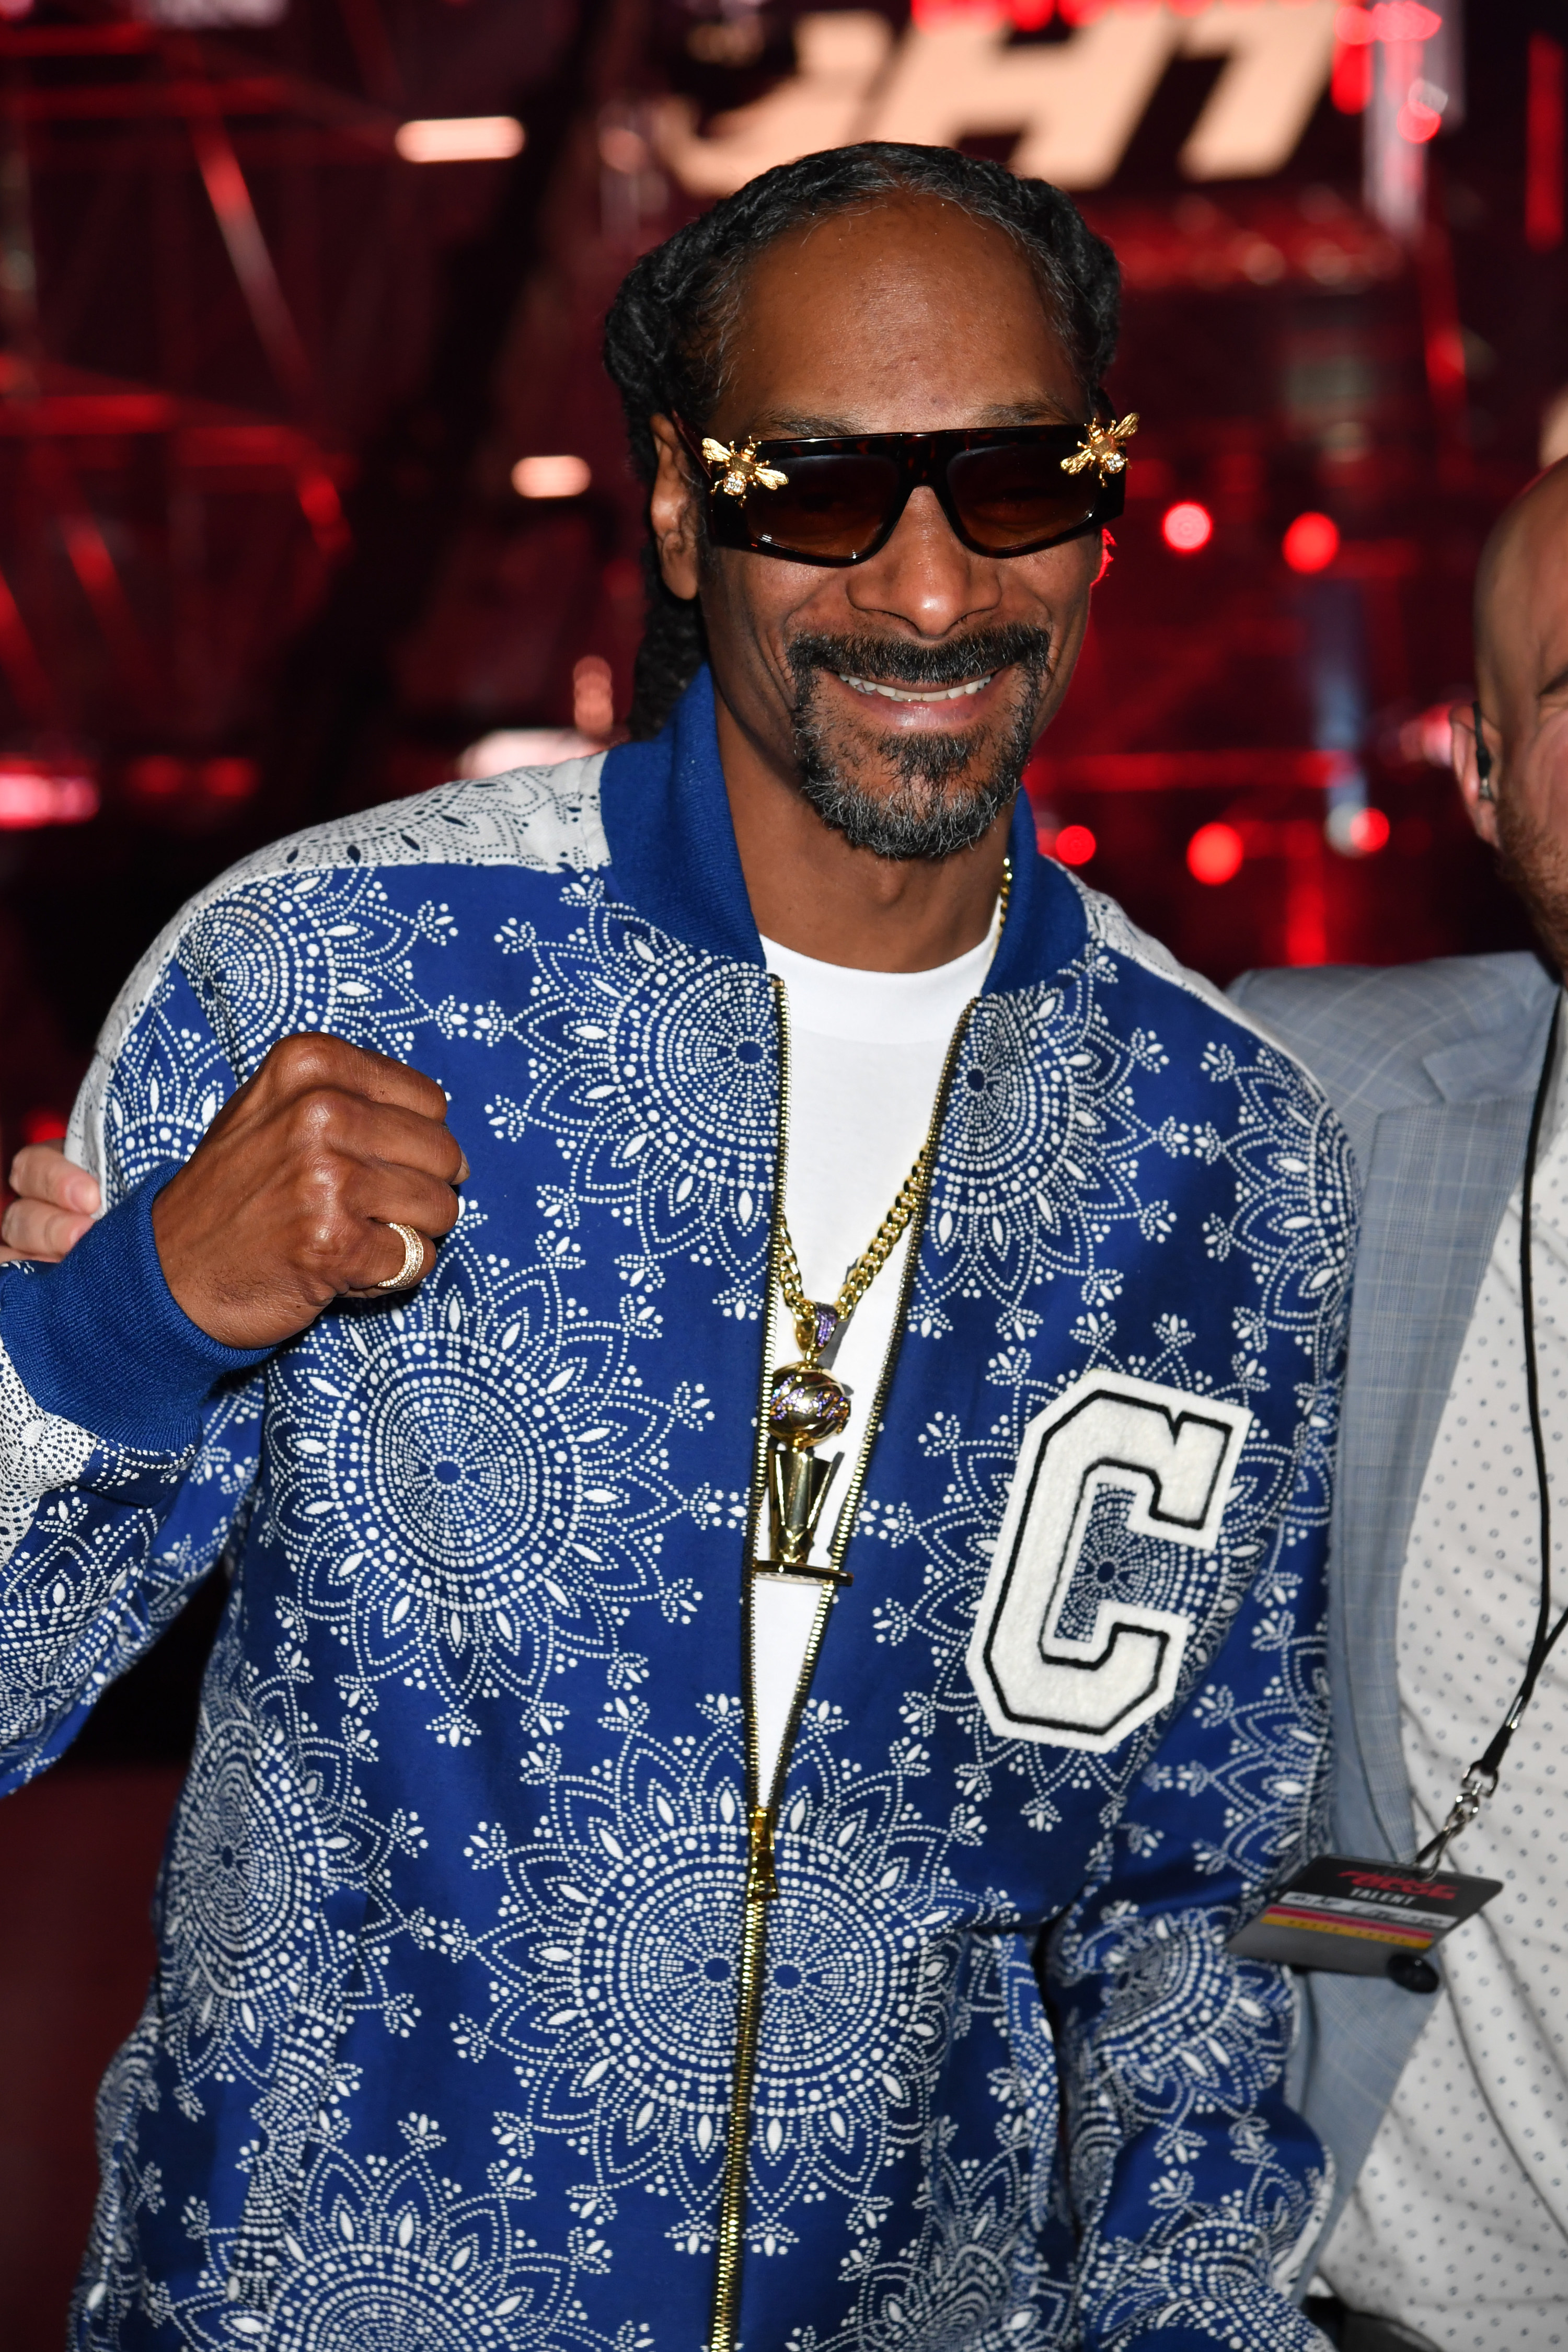 Snoop Dogg at an event in Atlanta in 2021